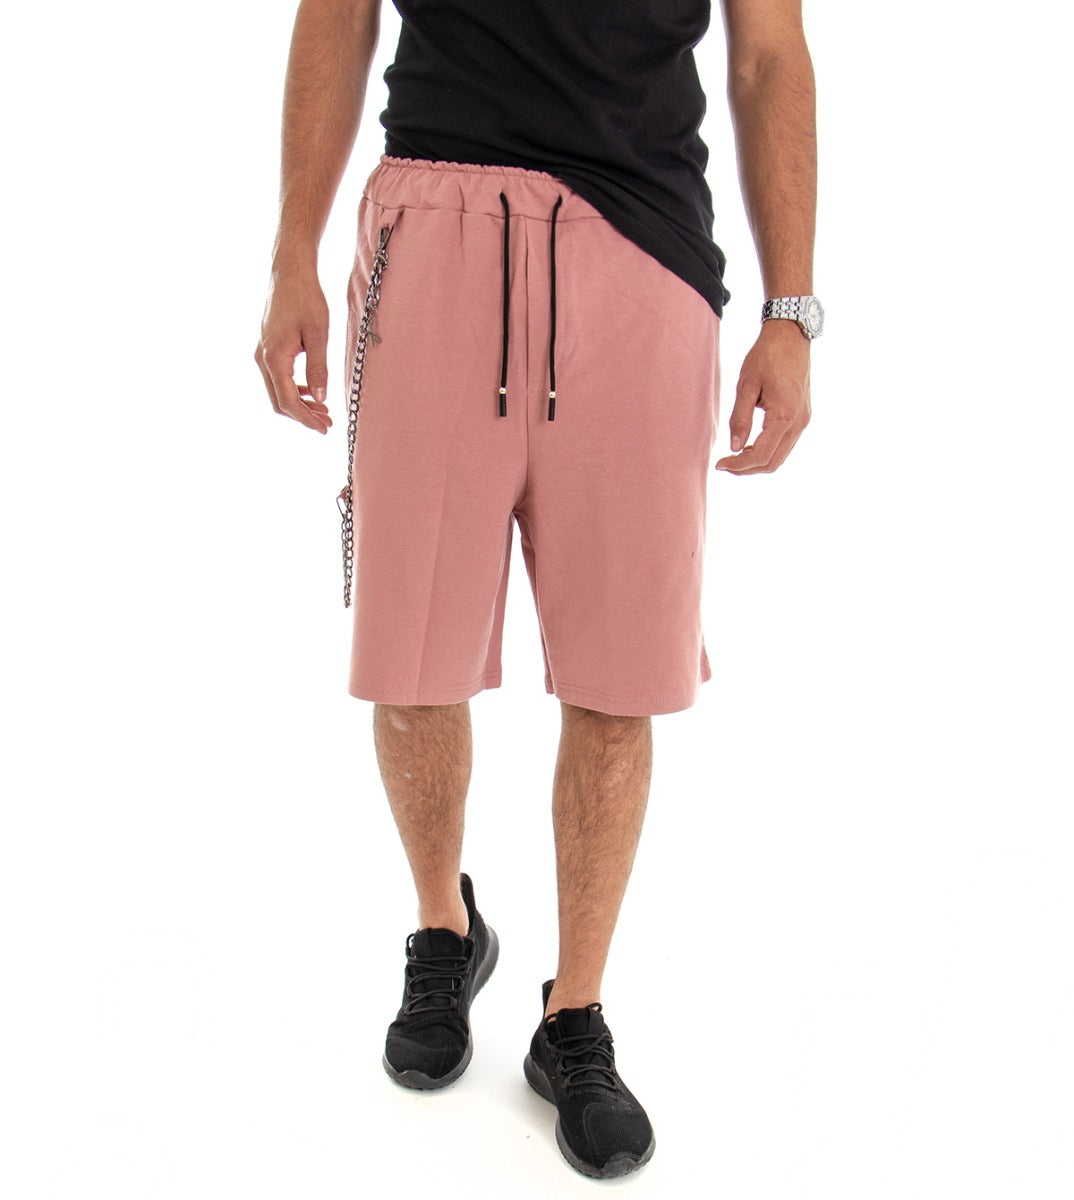 Bermuda Shorts Men's Short Over Solid Color Pink Cotton GIOSAL-PC1490A